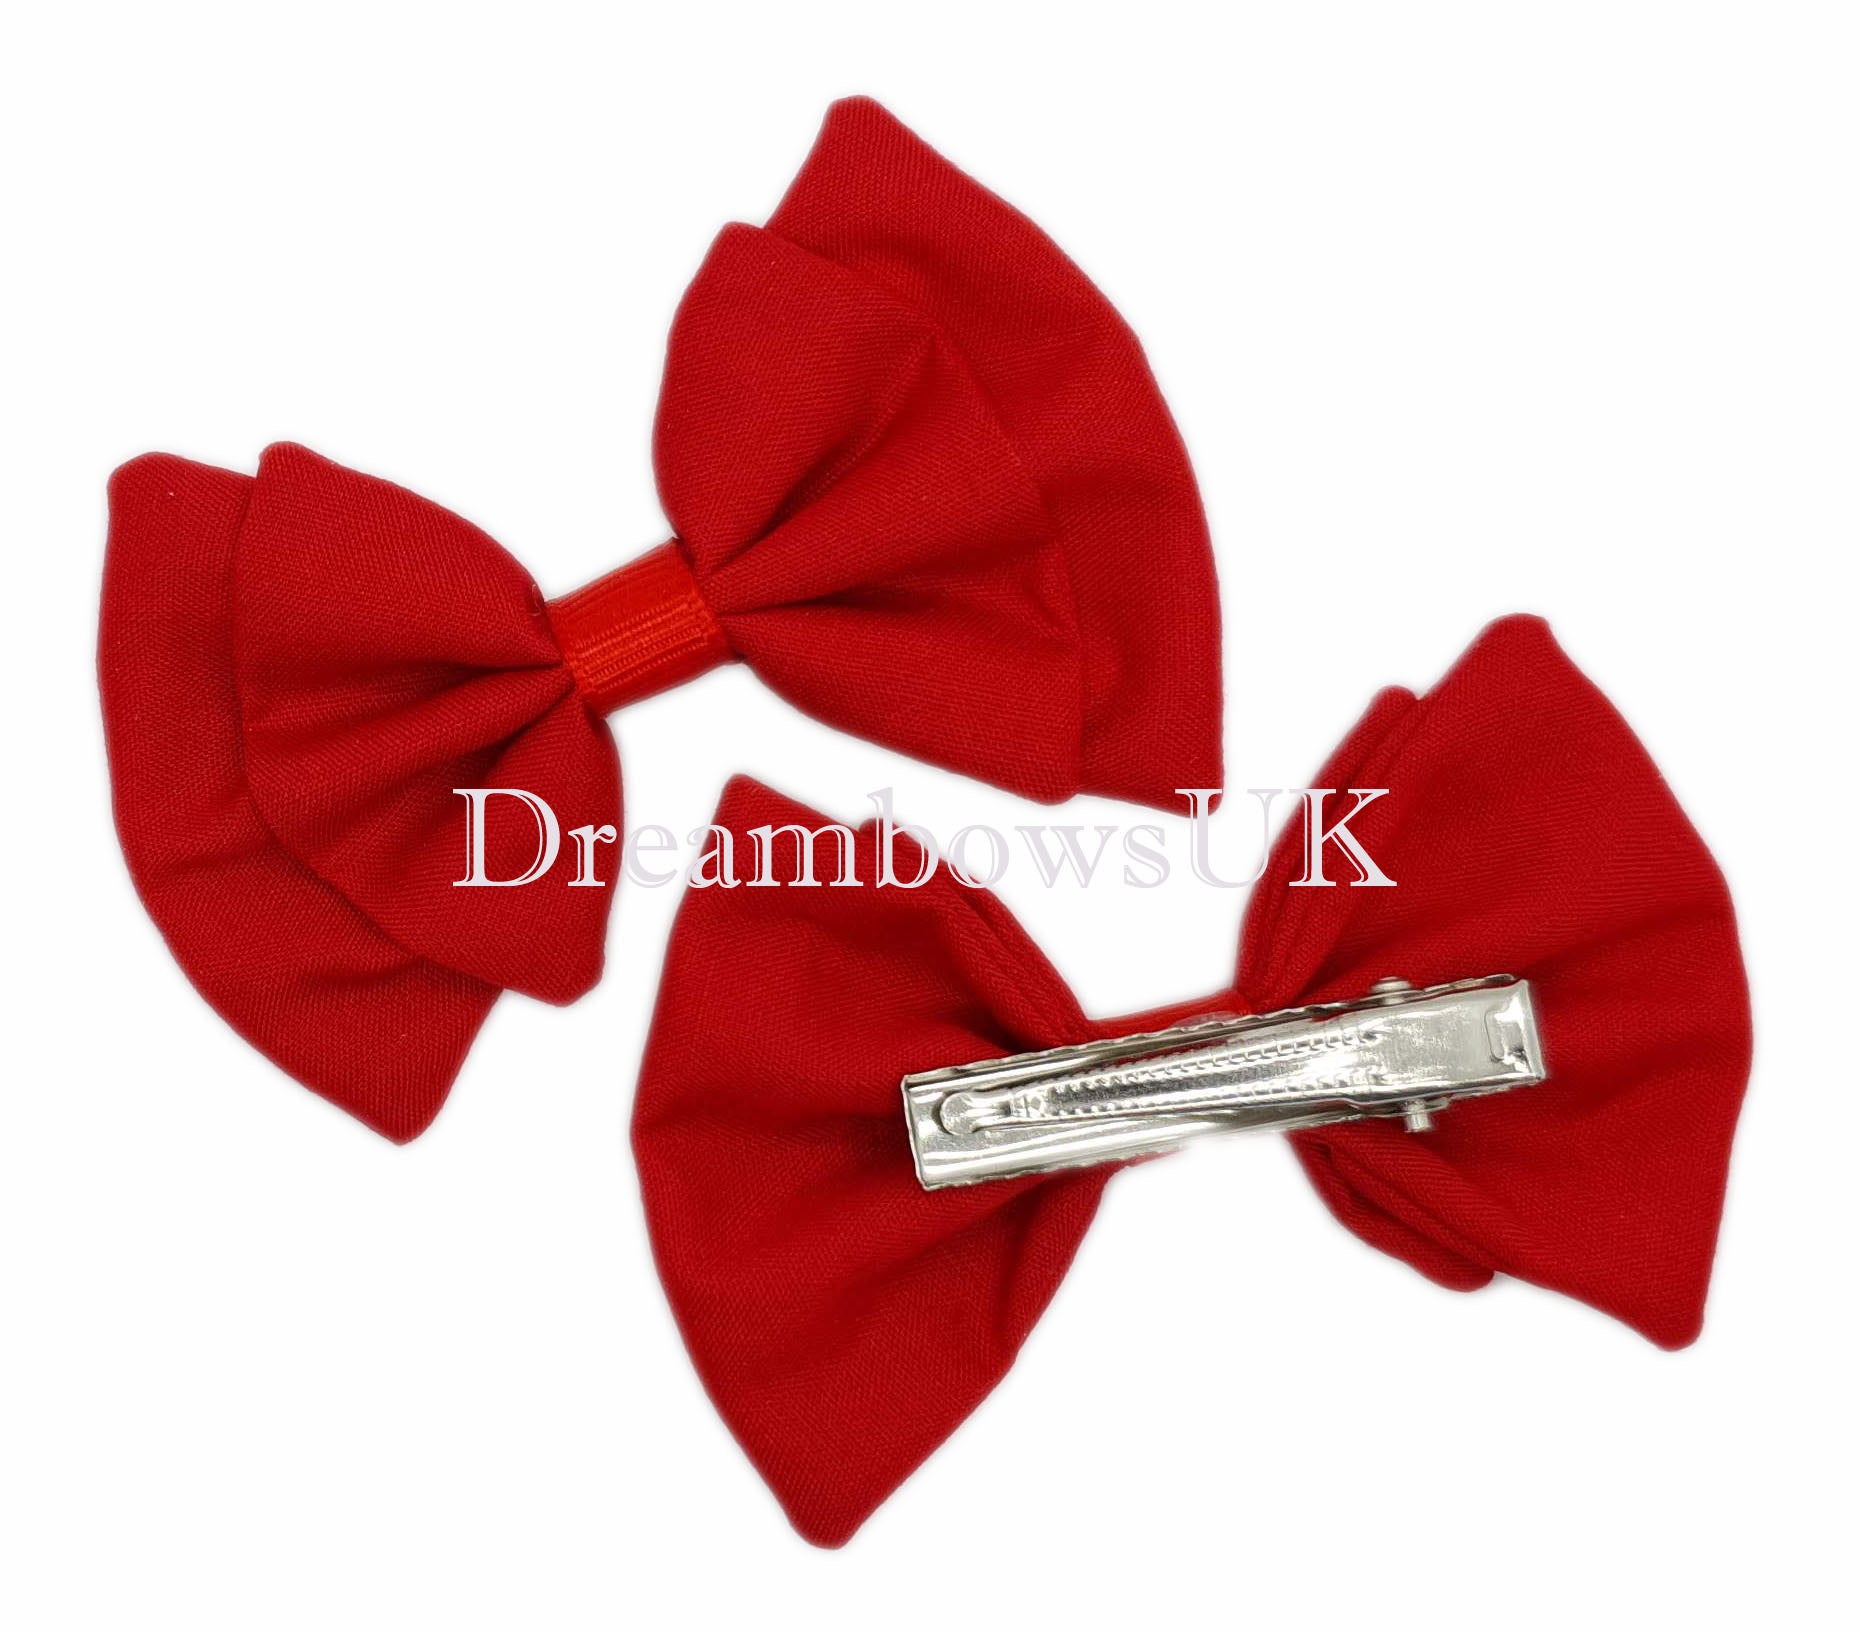 Girls red hair bows on alligator clips